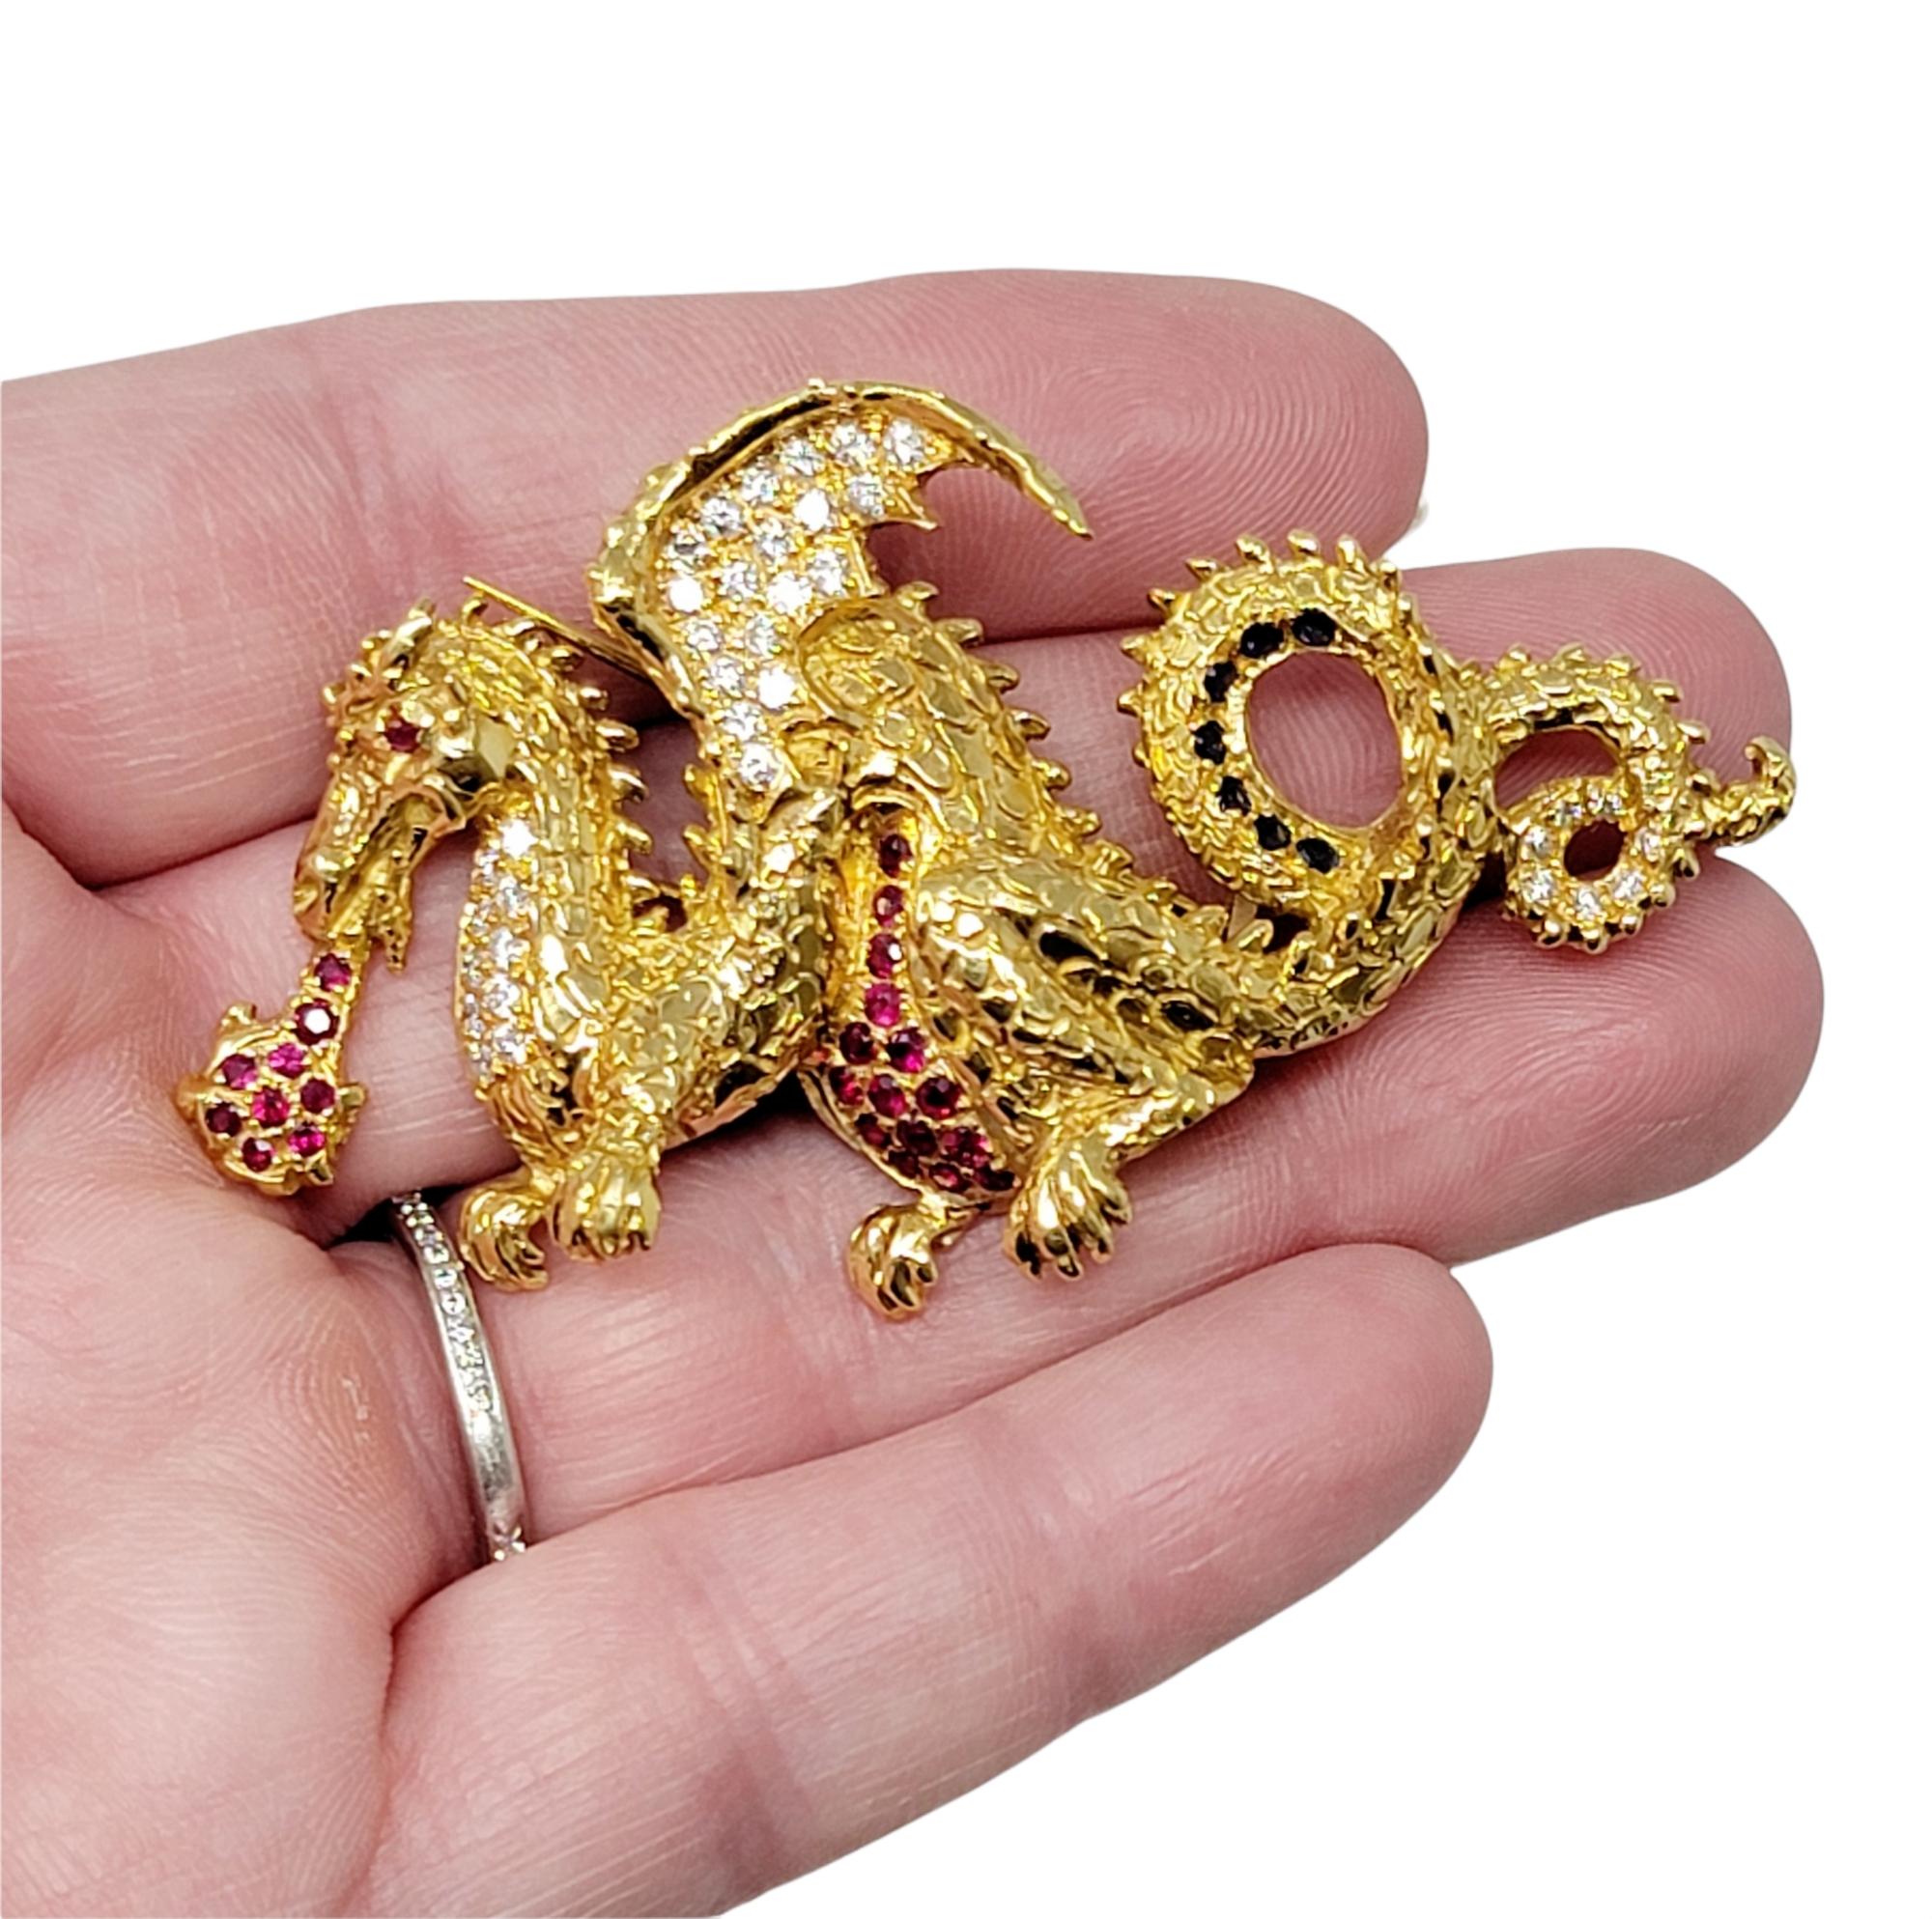 Diamond, Ruby and Sapphire Dragon Brooch 18 Karat Yellow Gold .93 Carats Total  In Good Condition For Sale In Scottsdale, AZ